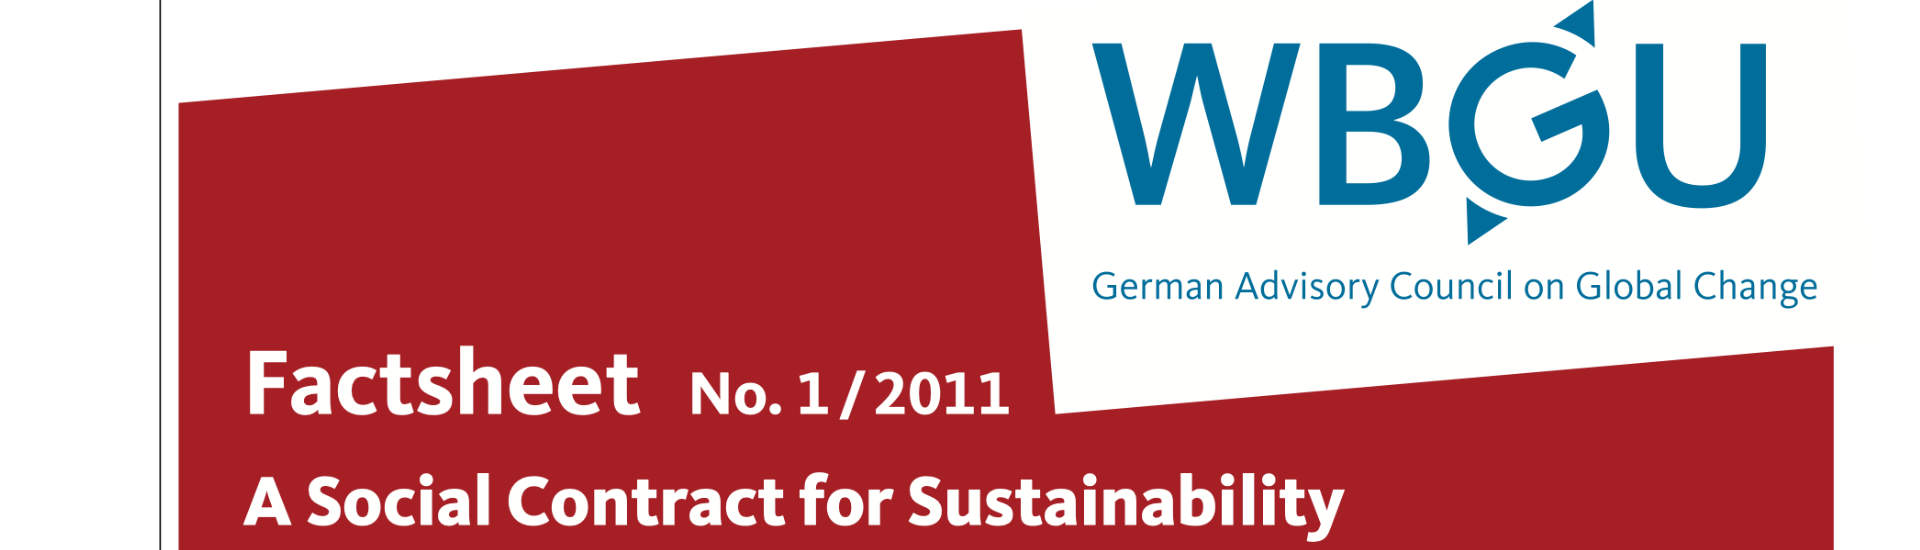 Factsheet: A Social Contract for Sustainability